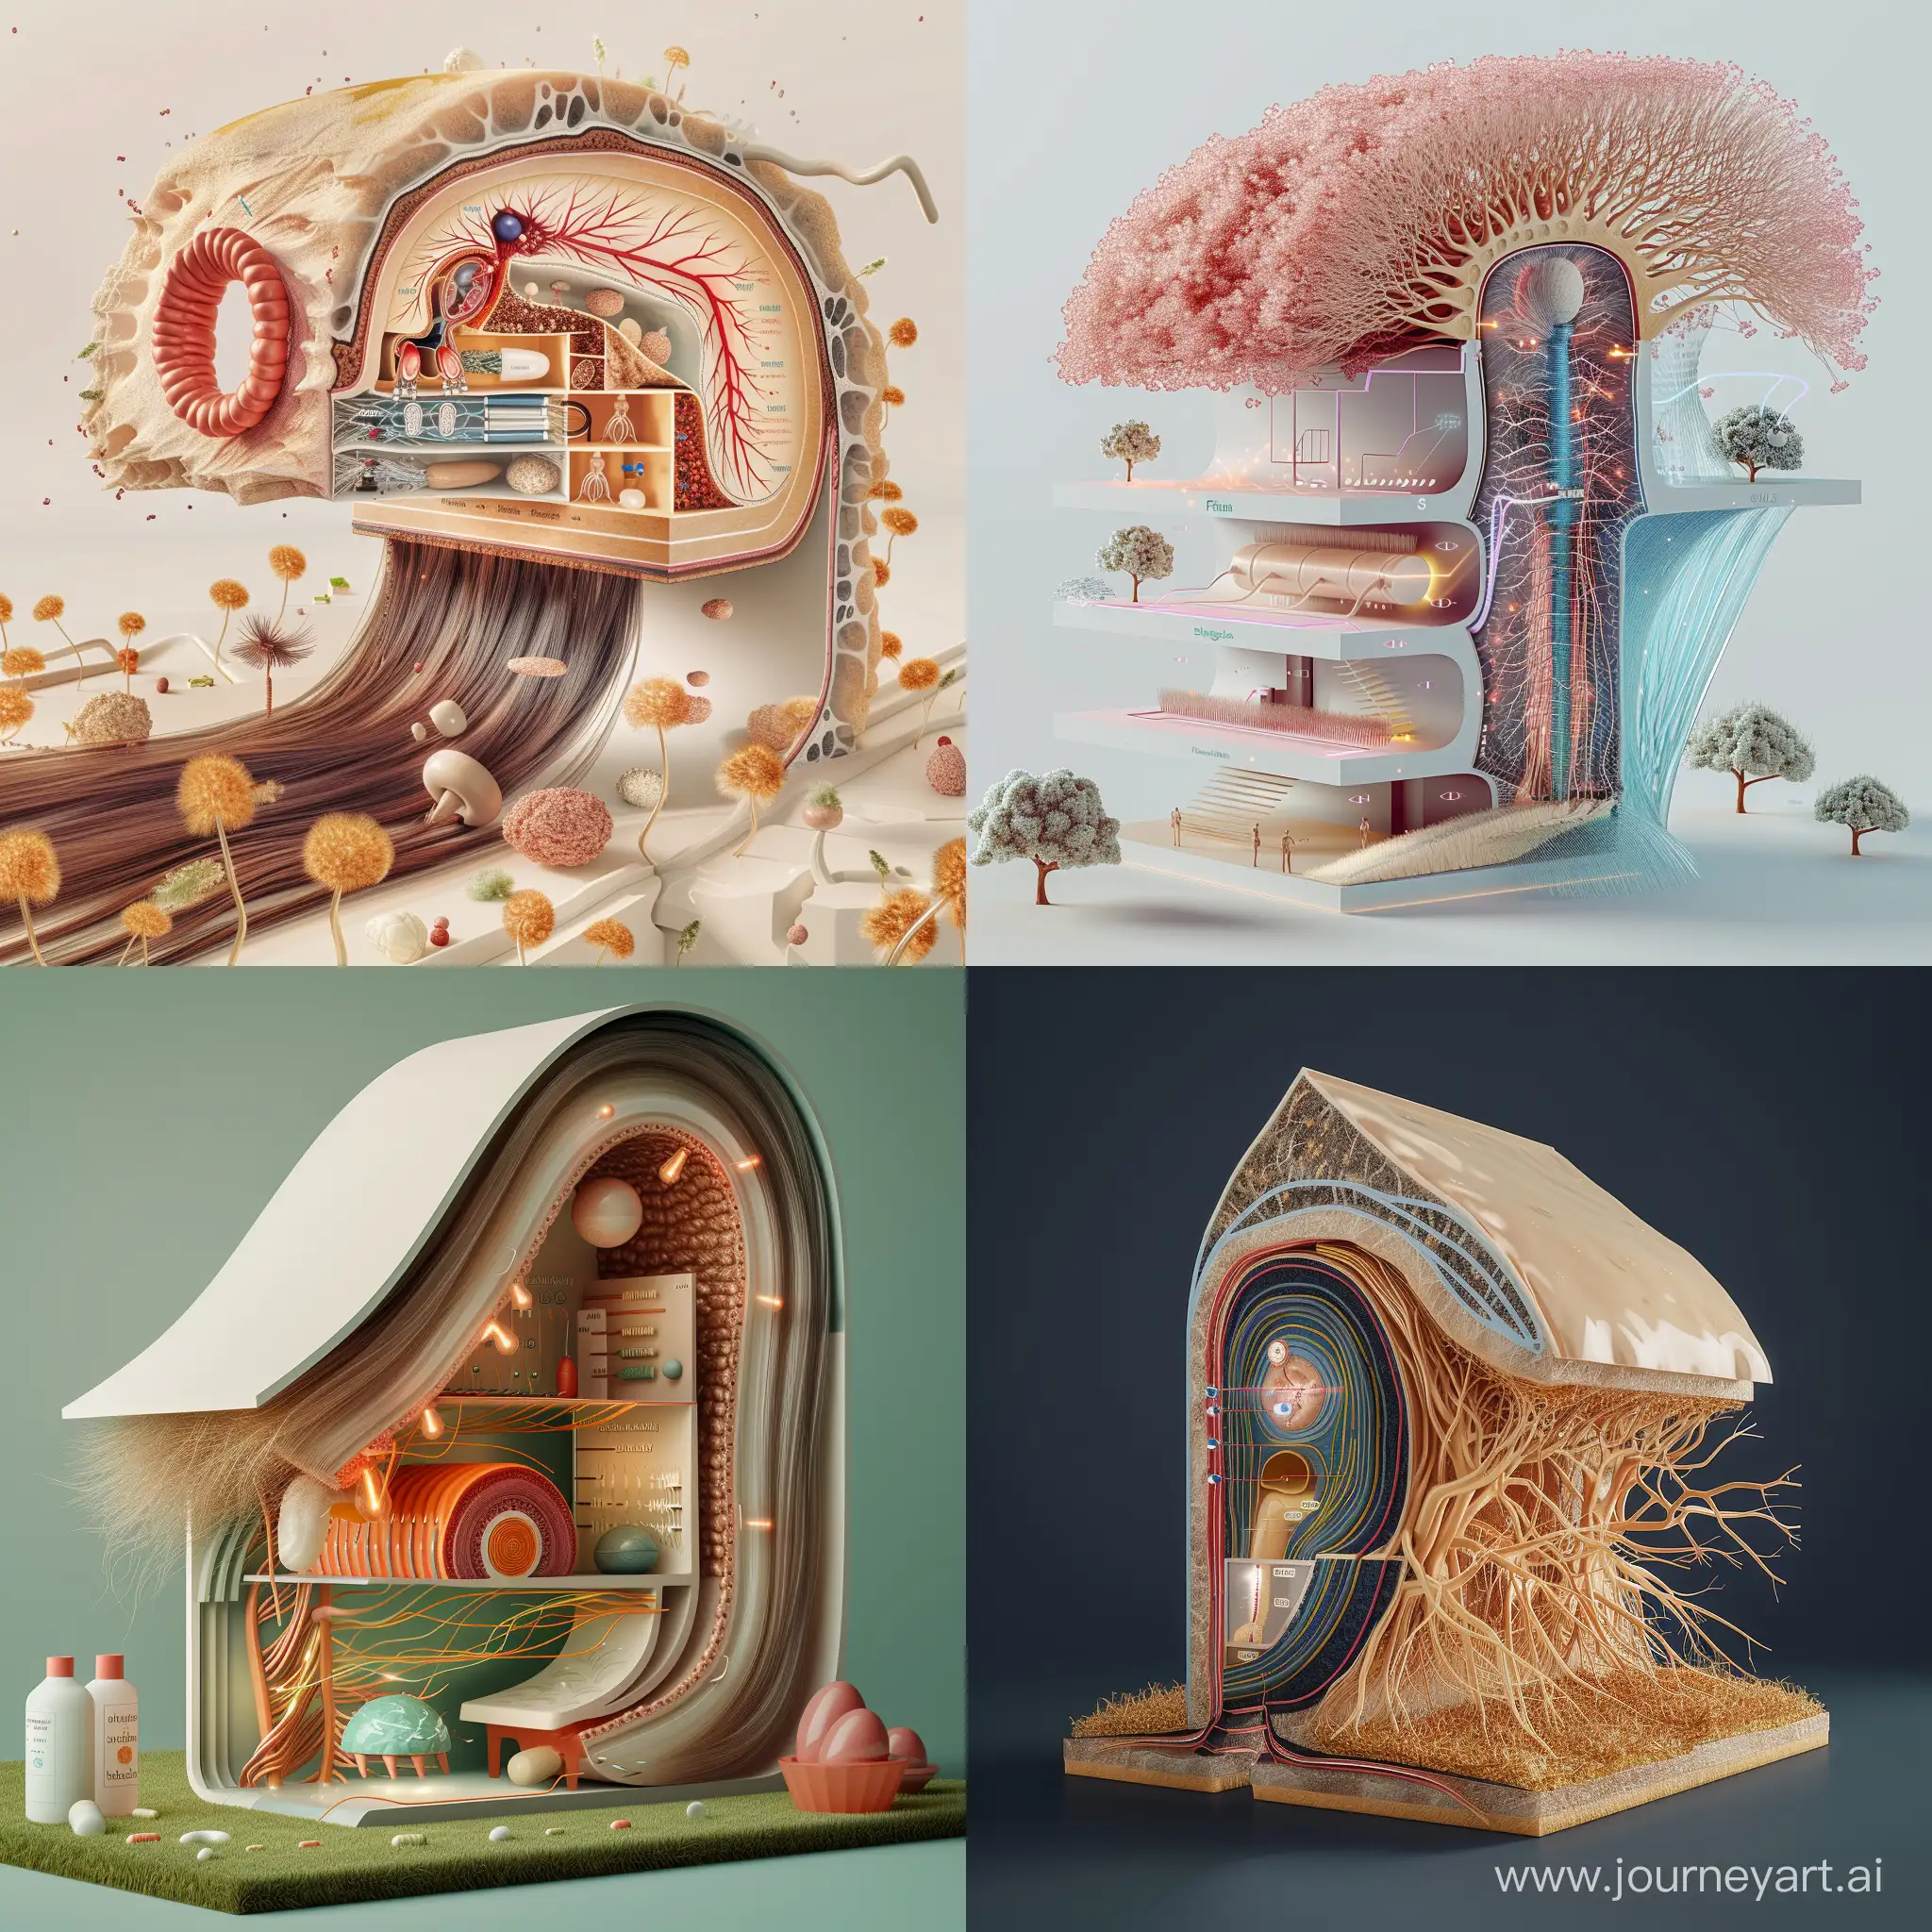 the world of a one hair follicle in 3D section with a diagram of its contents, Évariste Vital Luminais, detailed cross-sectional illustration of a hair, computer rendering, panfuturism, simple, levels like a house